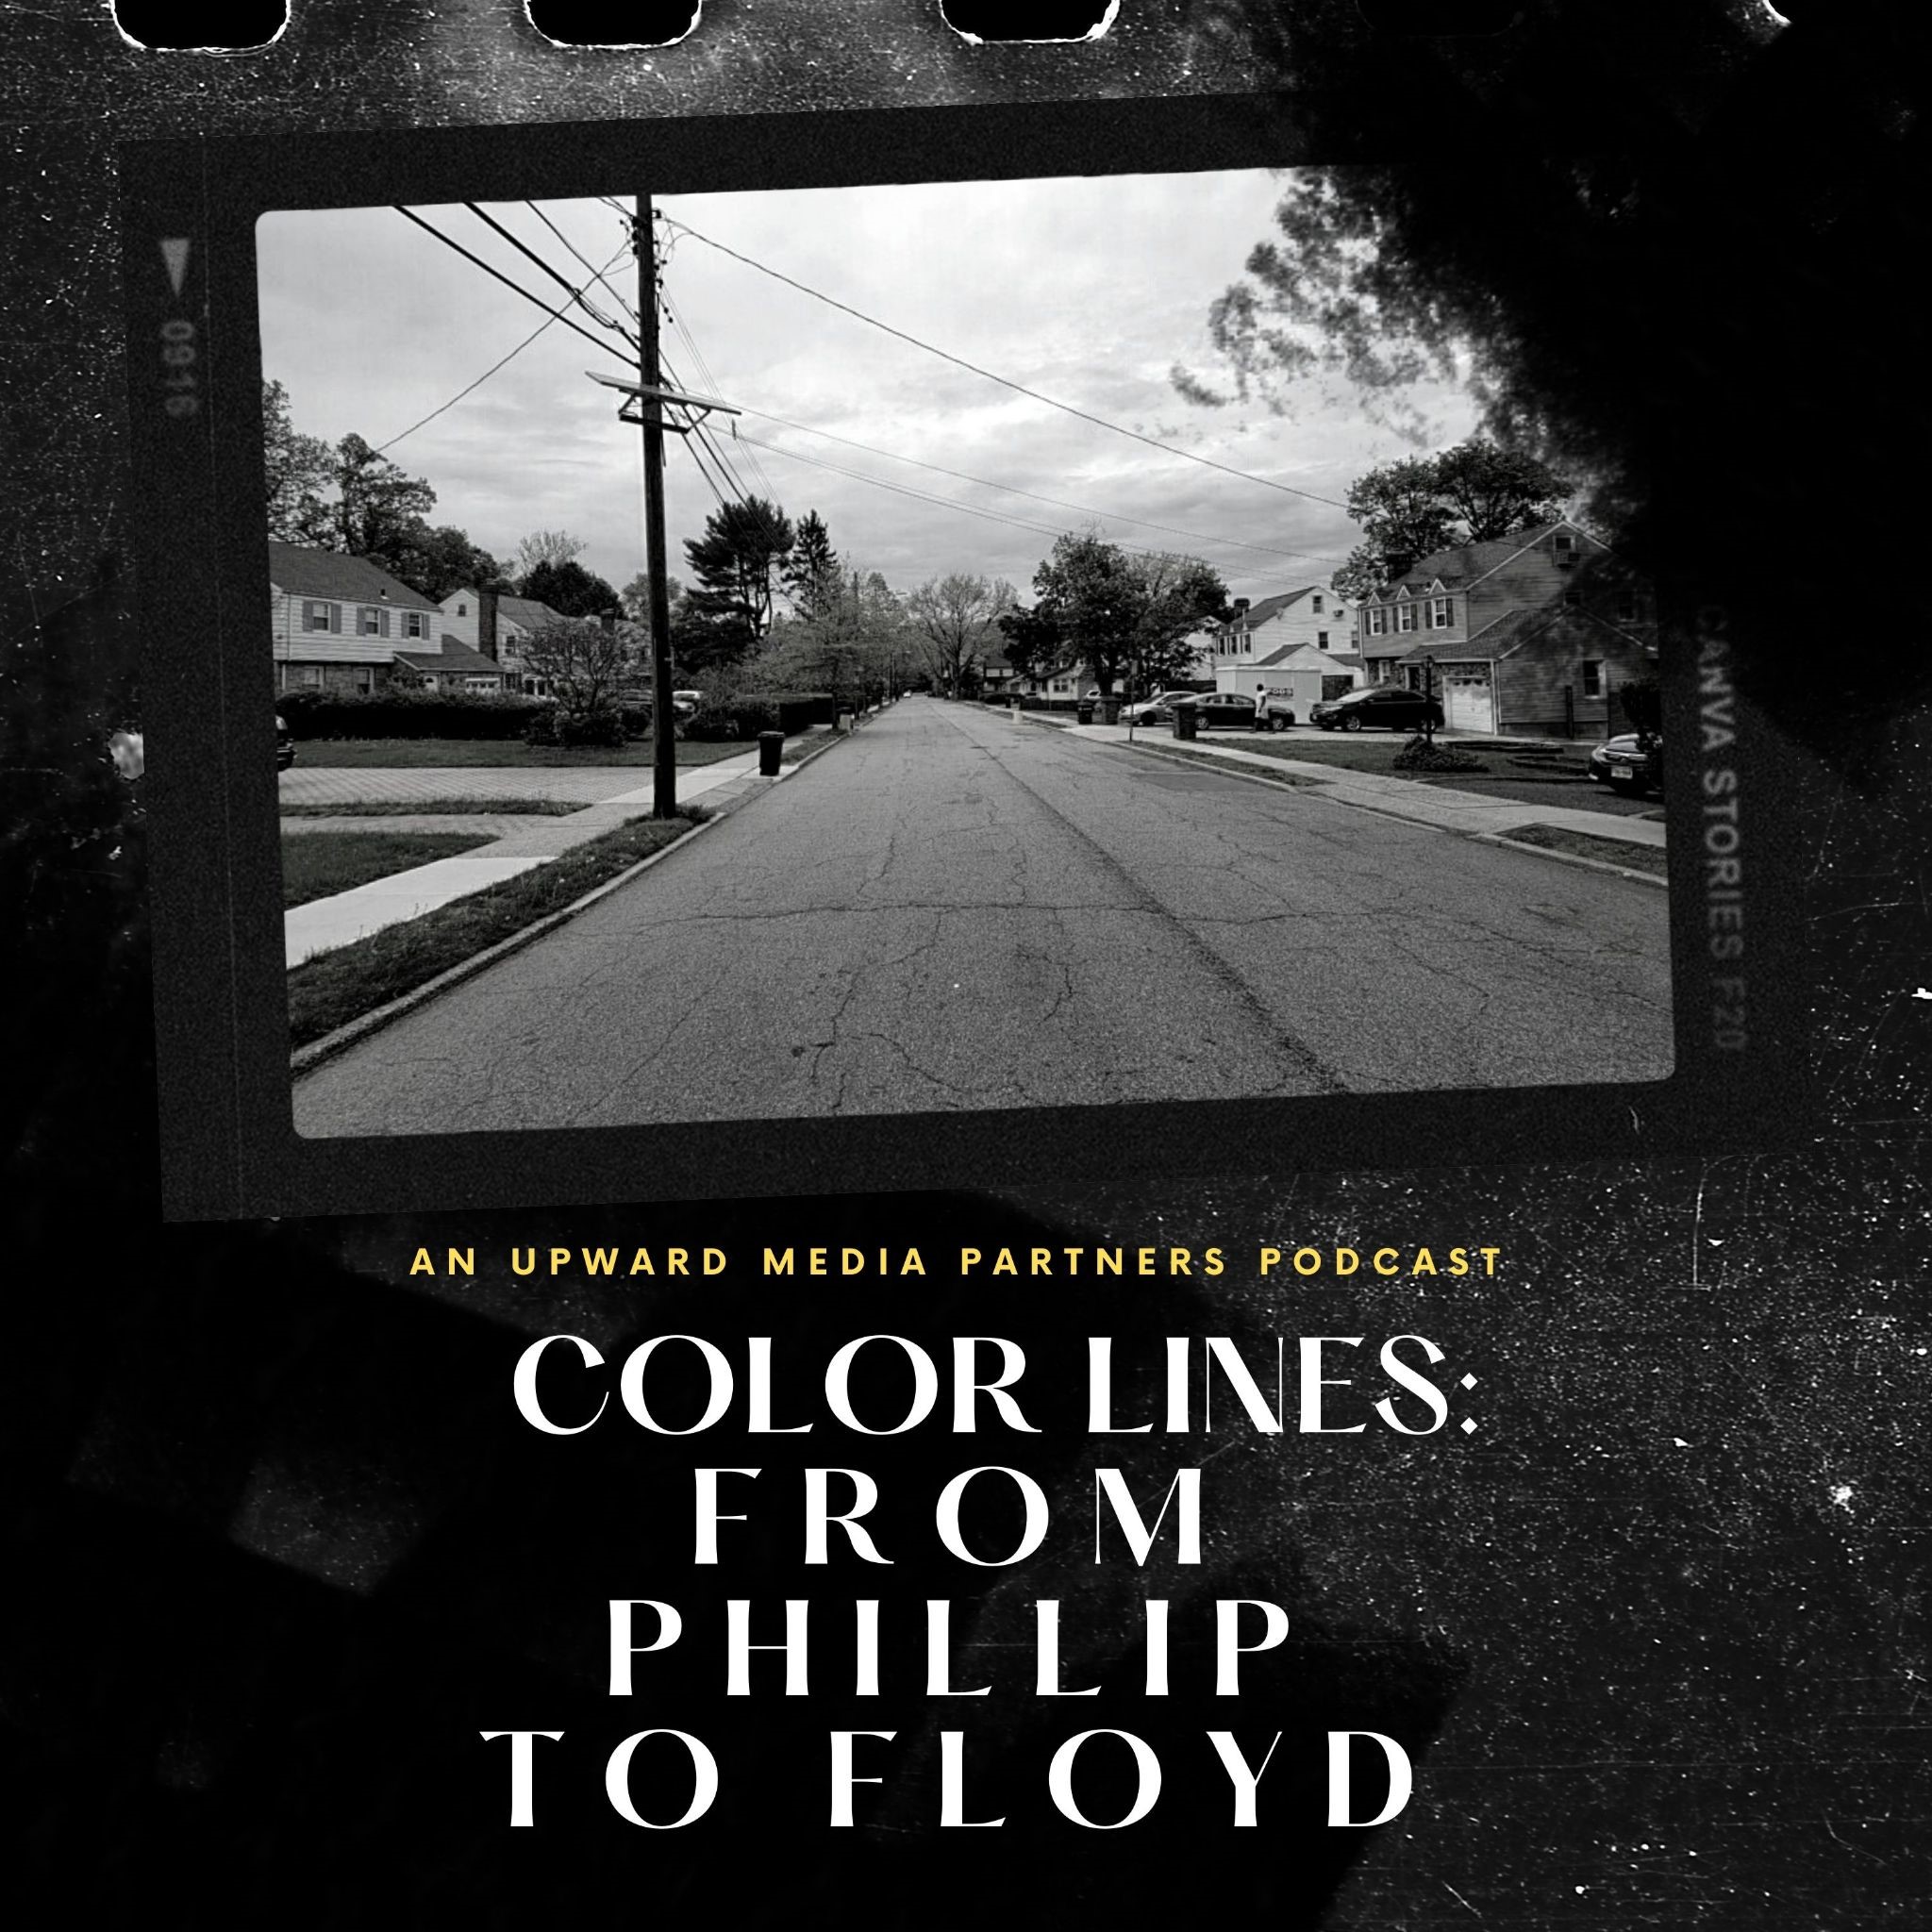 Upward Media Partners Releases “COLOR LINES: From Phillip to Floyd” – A Limited Podcast Series Exploring the American Tragedy of Race, Police Shootings and the Search for Justice